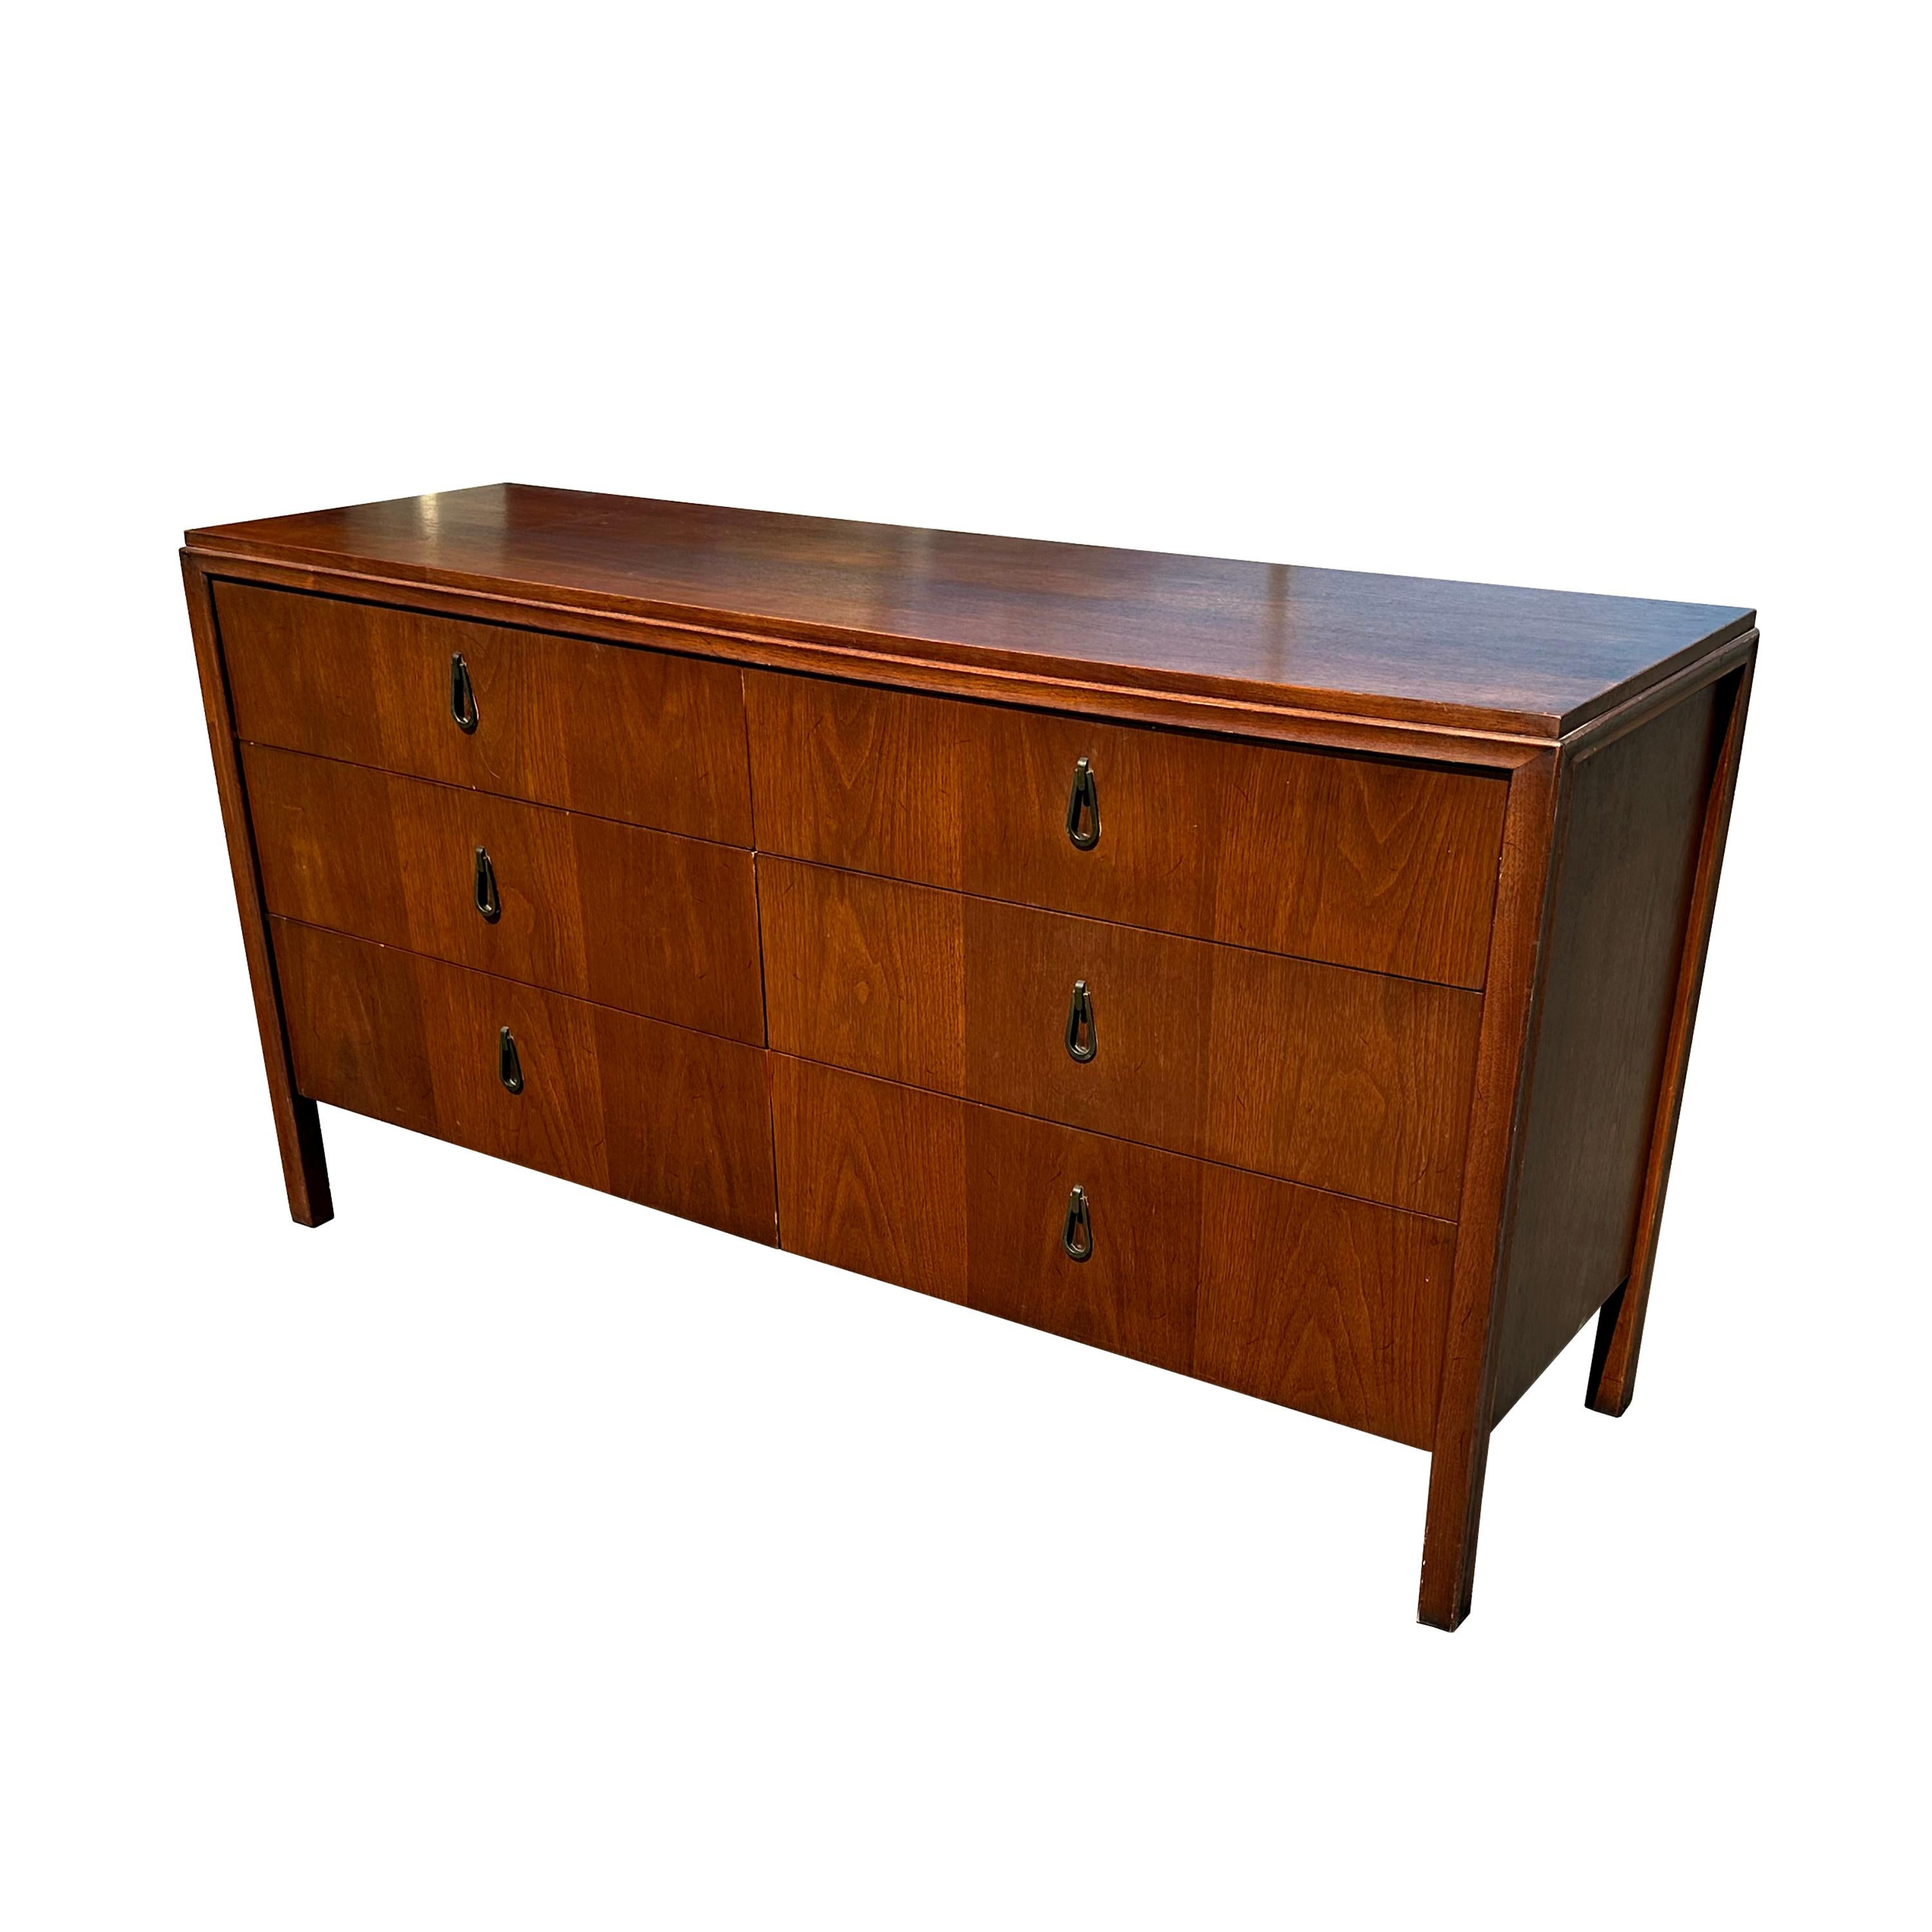 Sleek mid century modern design 6 drawer dresser with original tear drop hardware. Great quality walnut double dresser by Mount Airy Furniture Company. This design is classic and would look great many different styles of decor. Use this piece in a